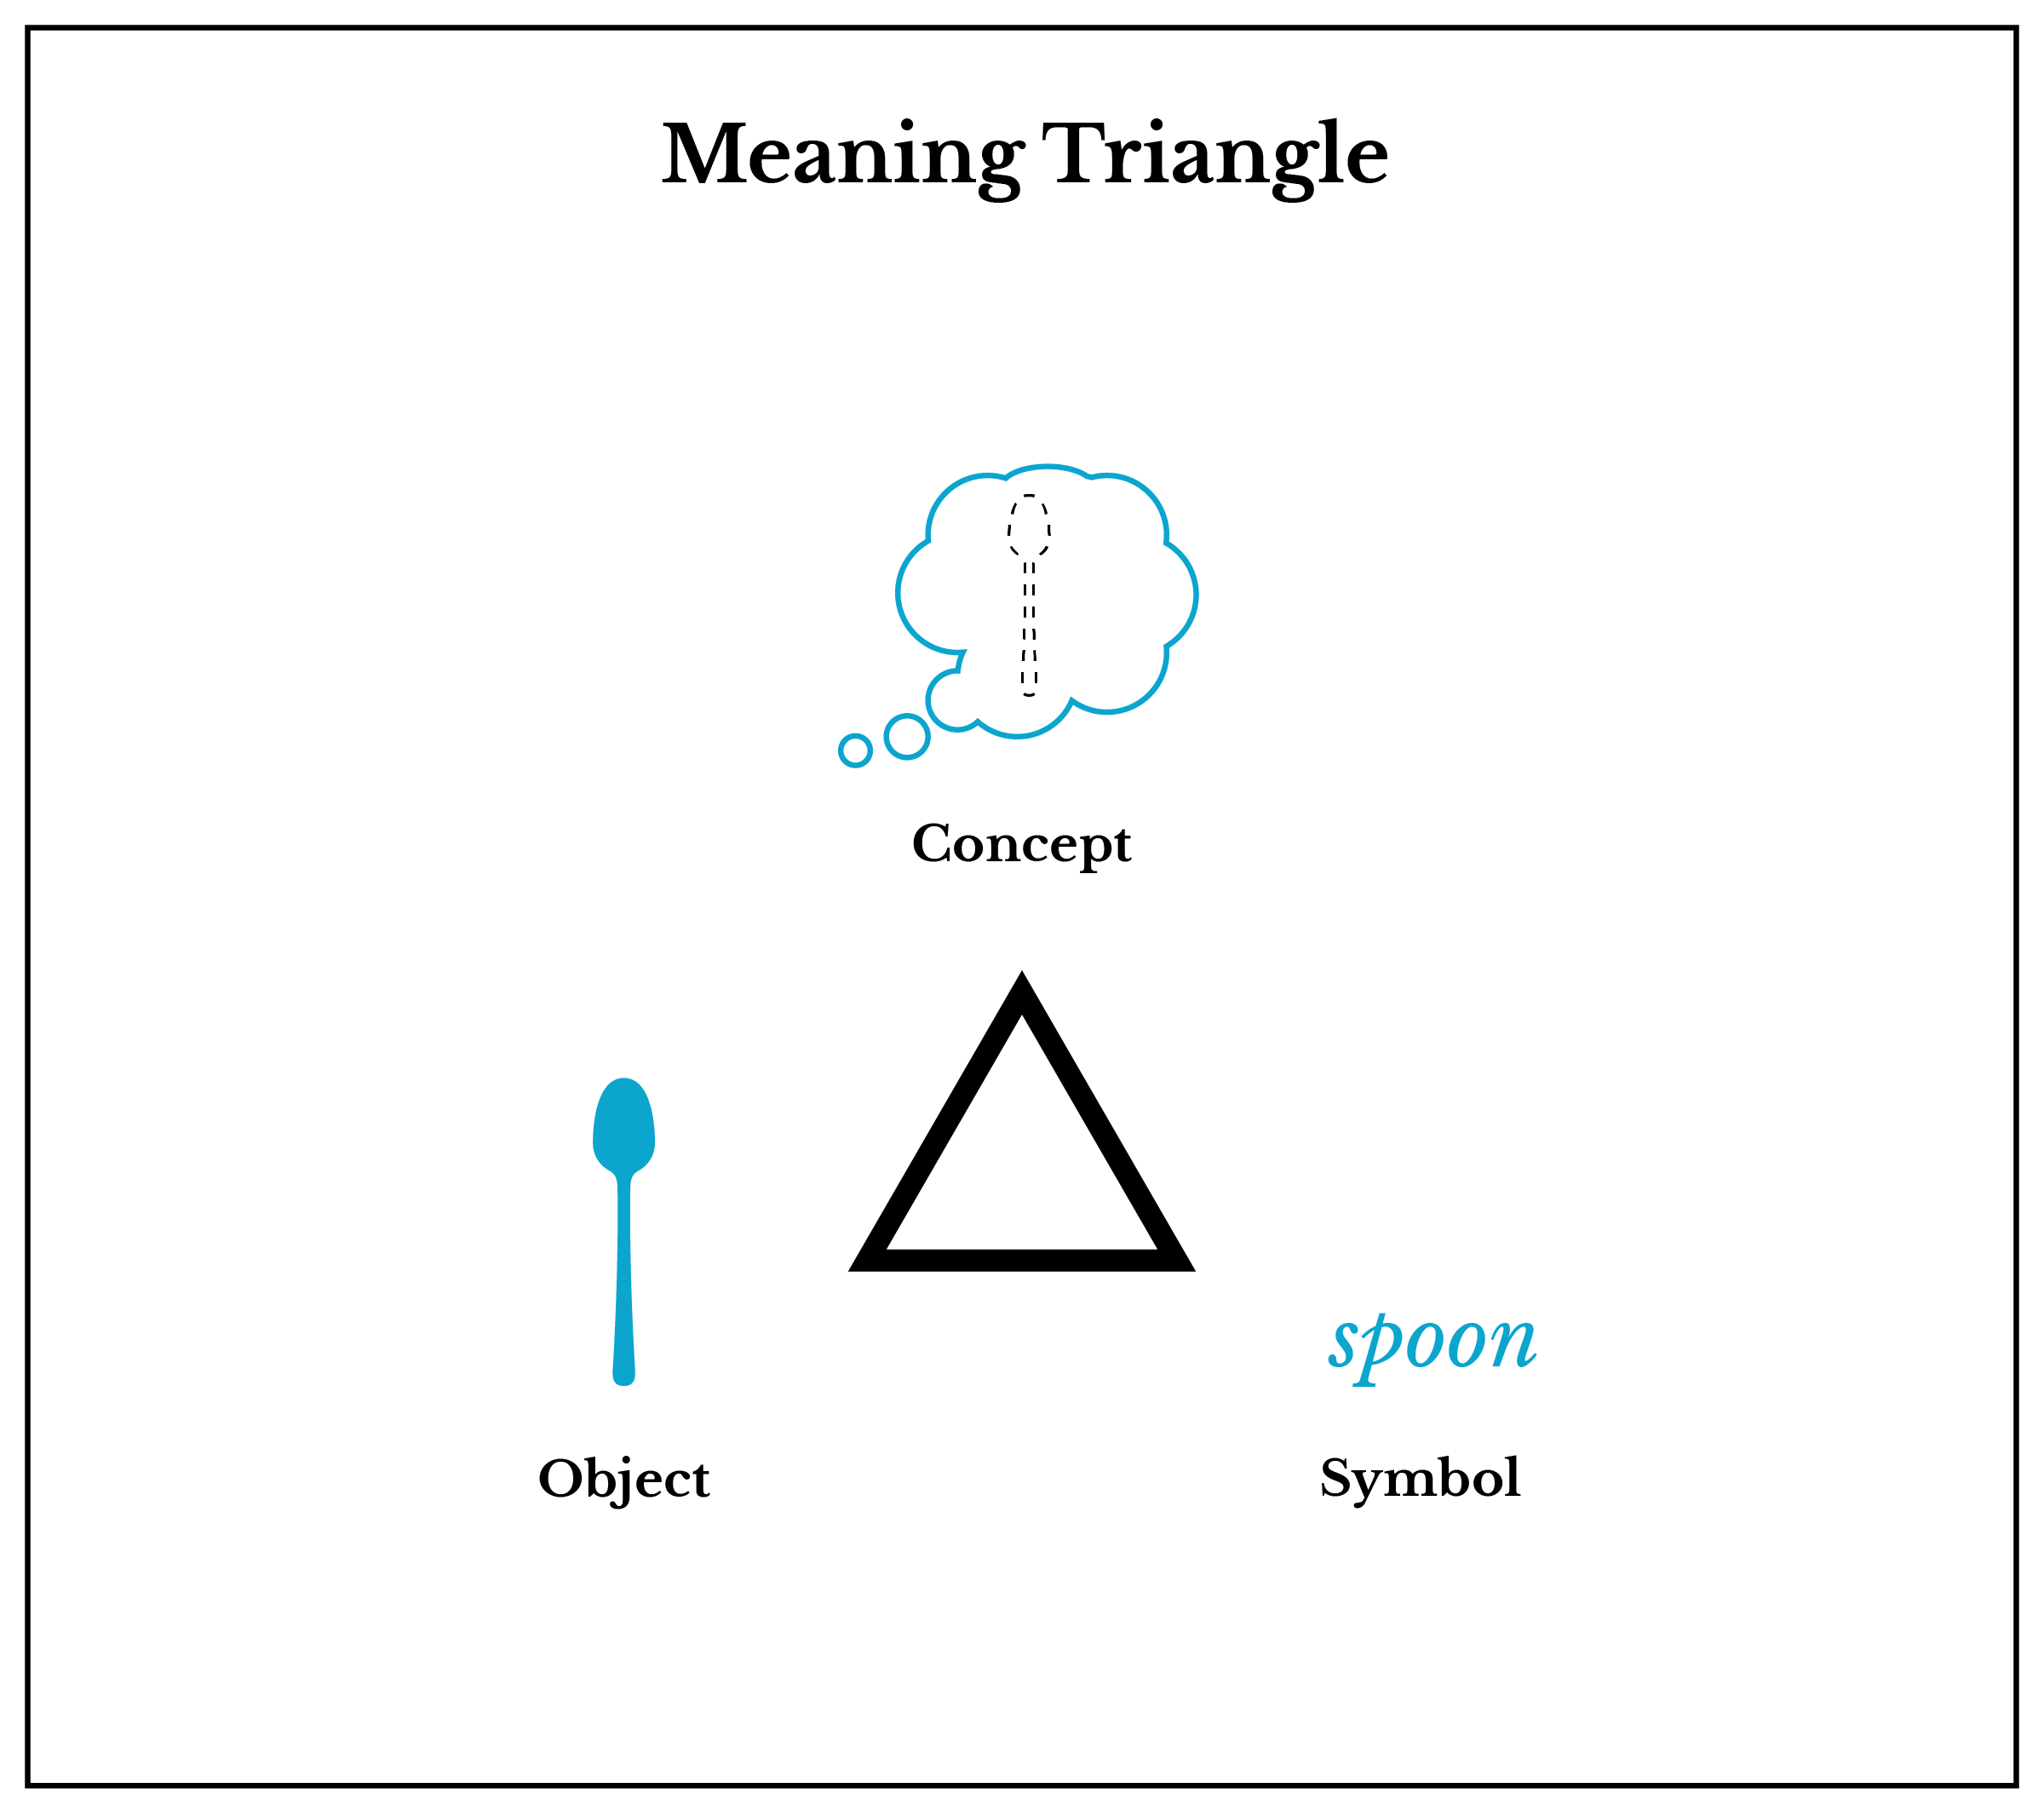 Meaning triangle diagram with a spoon